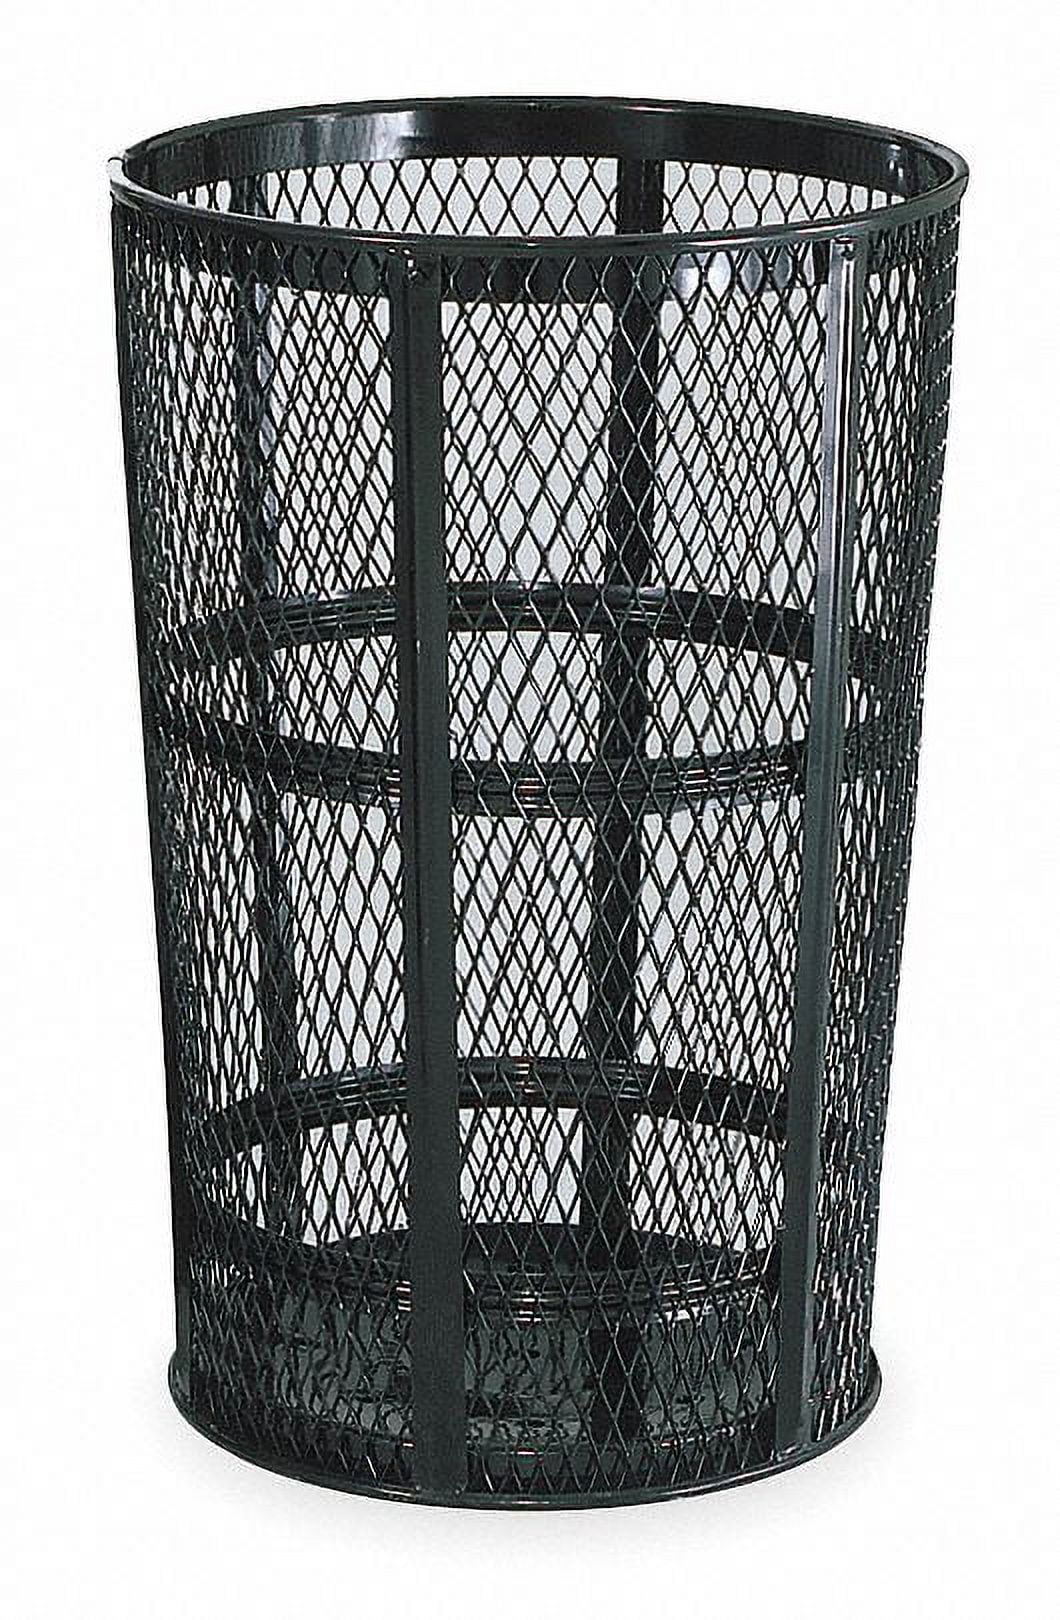 Rubbermaid Commercial Products 5 Gal. Round Mesh Trash Can in